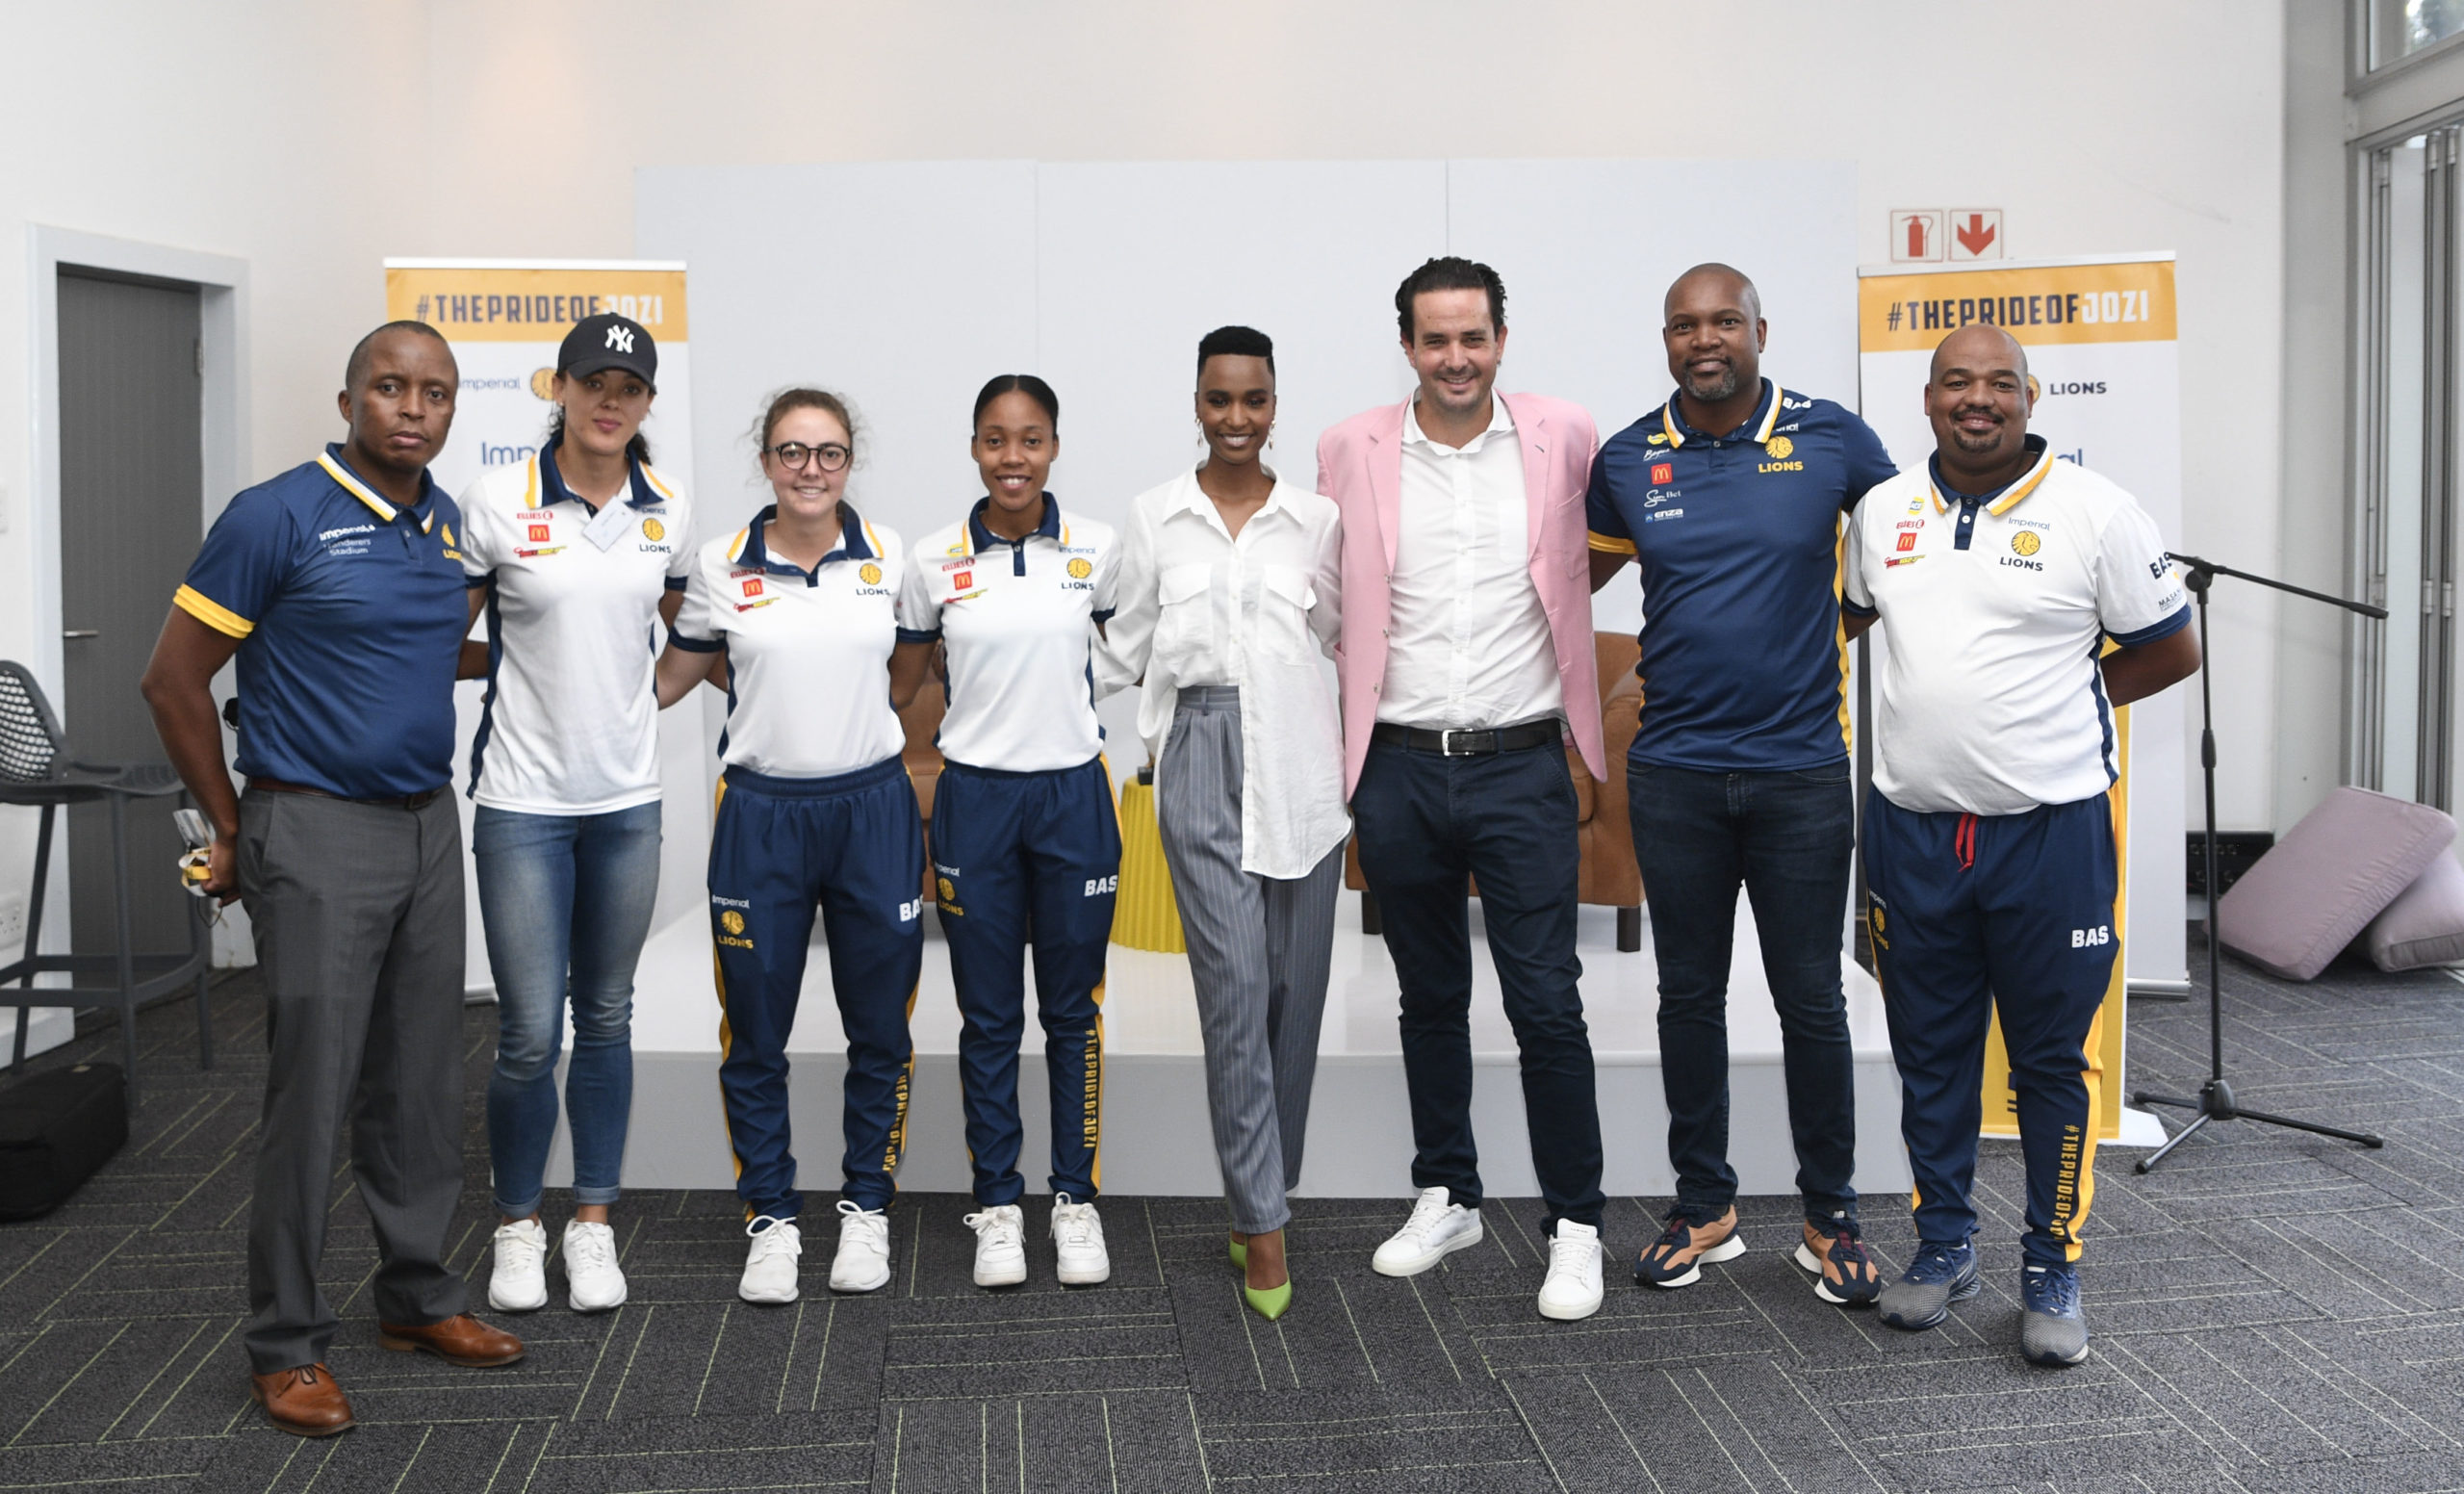 Lions Cricket and former Miss Universe Zozibini Tunzi partner to drive a diverse, inclusive and sustainable social and economic change